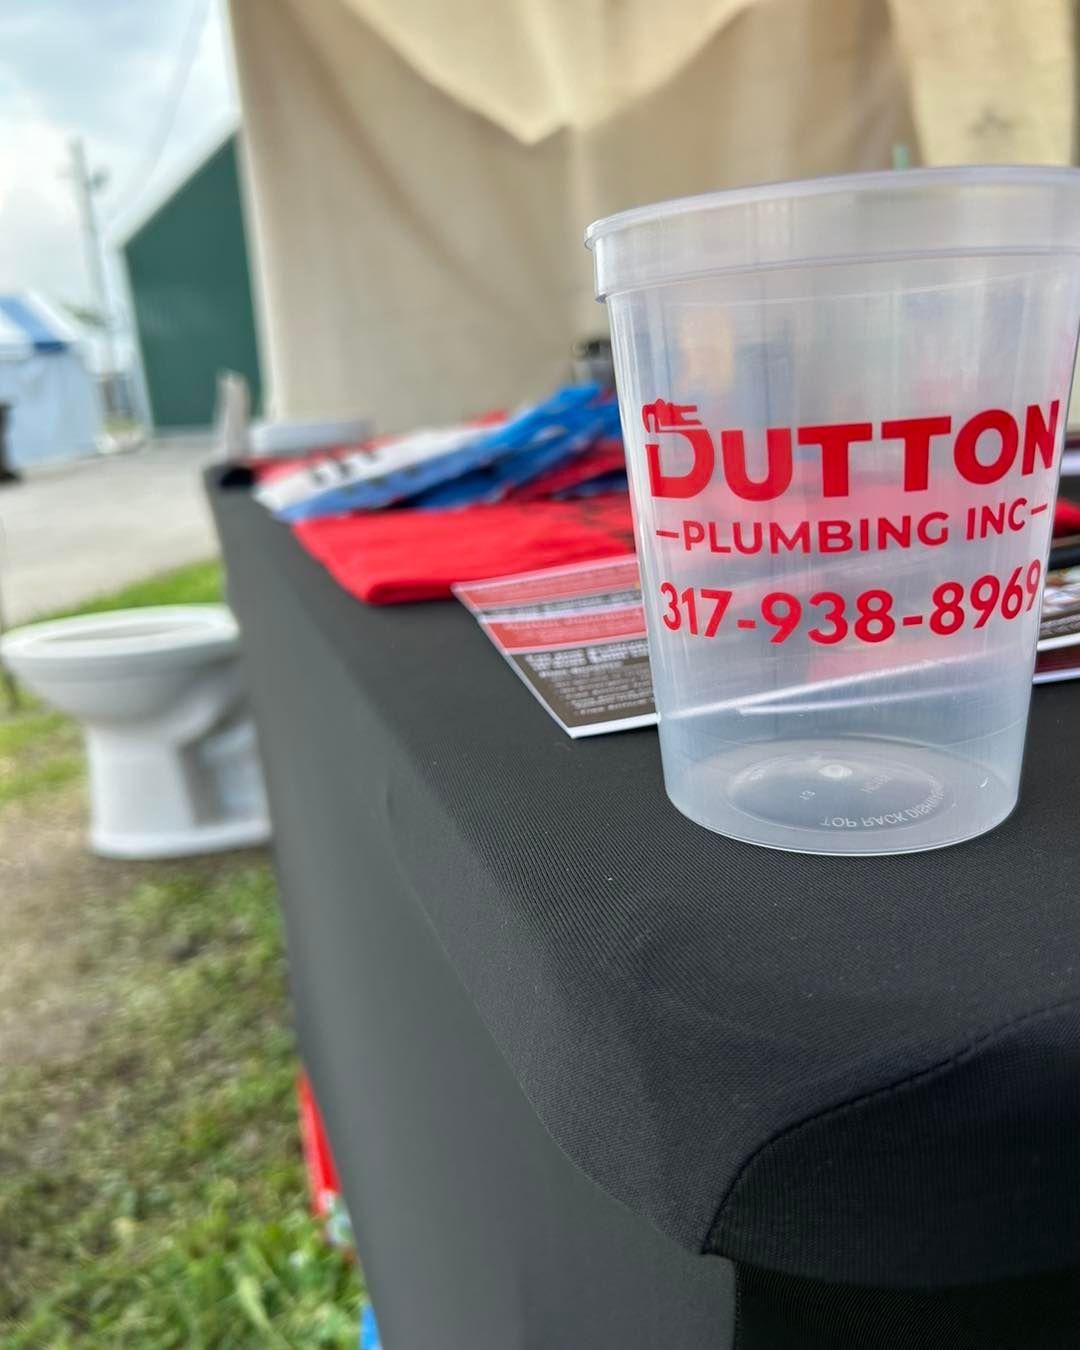 All Photos for Dutton Plumbing, Inc. in Whiteland, IN